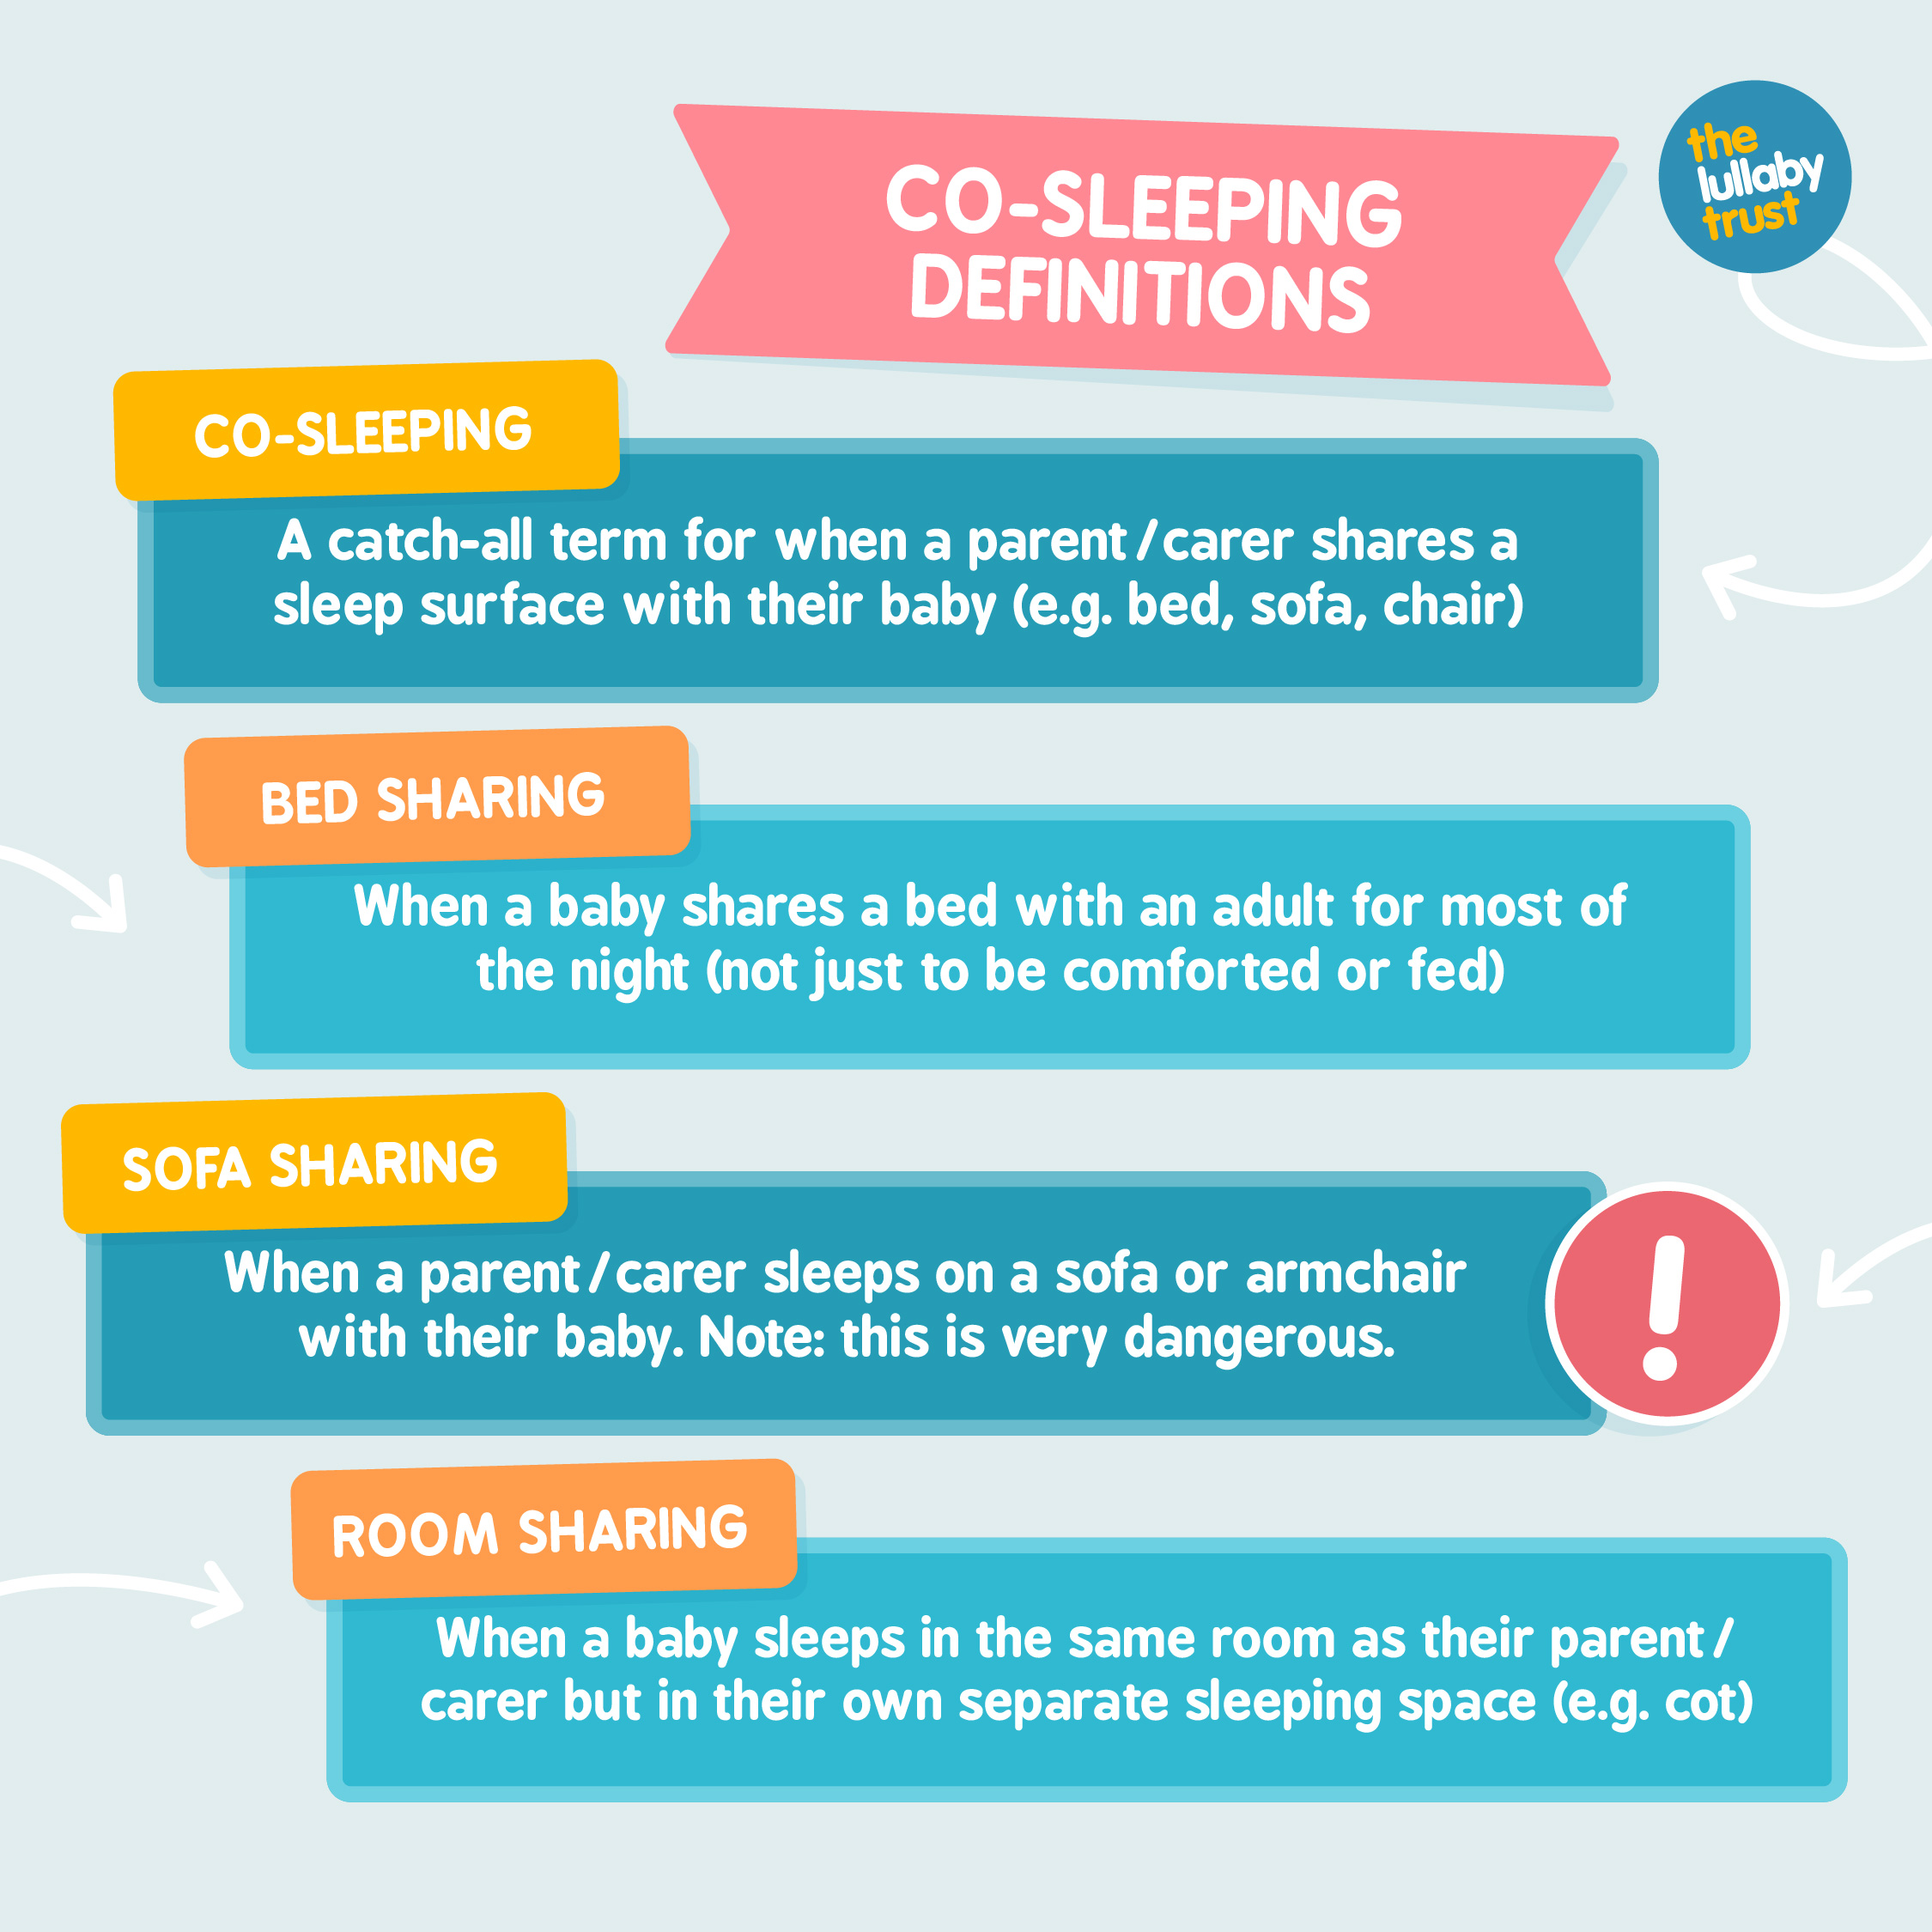 Co-sleeping is a catch-all term for when an adult shares a sleep surface with their baby (e.g. bed, sofa, chair). Bed-sharing is when a baby shares a bed with an adult for most the night. Sofa-sharing is what an adult sleeps on a sofa or armchair with their baby (this is very dangerous). Room-sharing is when a baby sleeps in the same room as an adult but in their own separate sleeping space (e.g. cot)